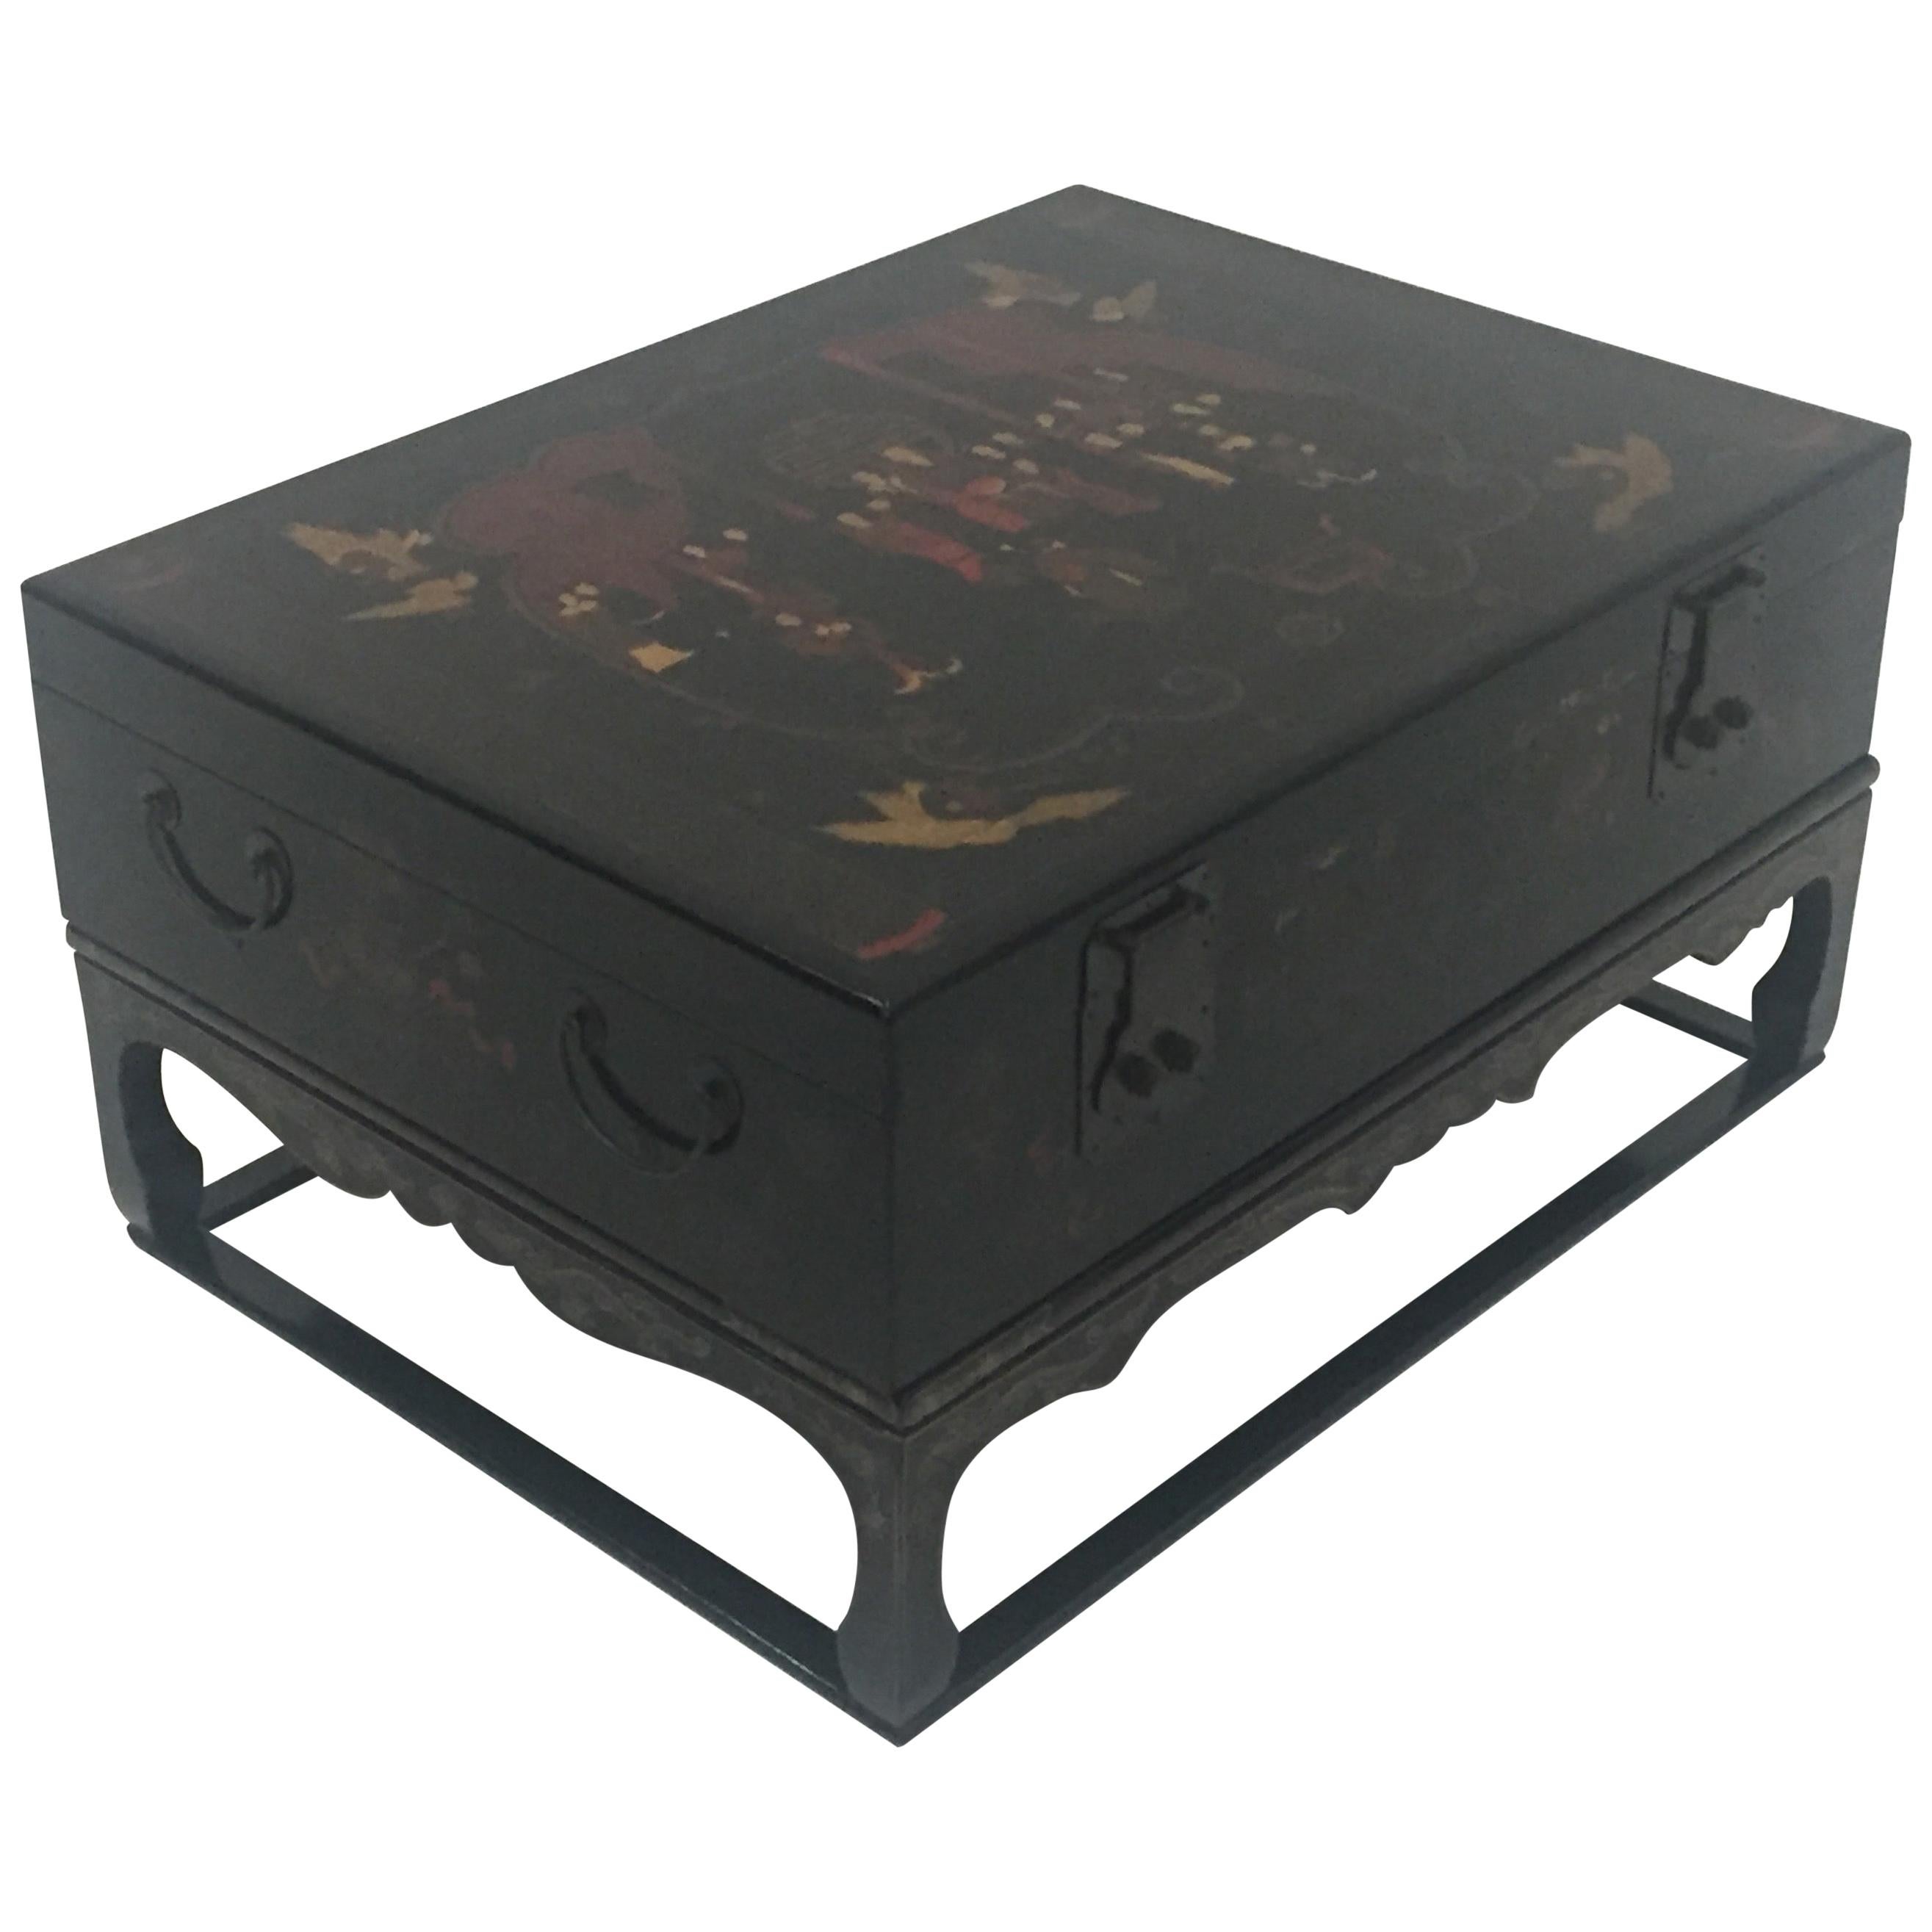 Stunning Asian Black Laquer Box on Custom Stand Coffee Table